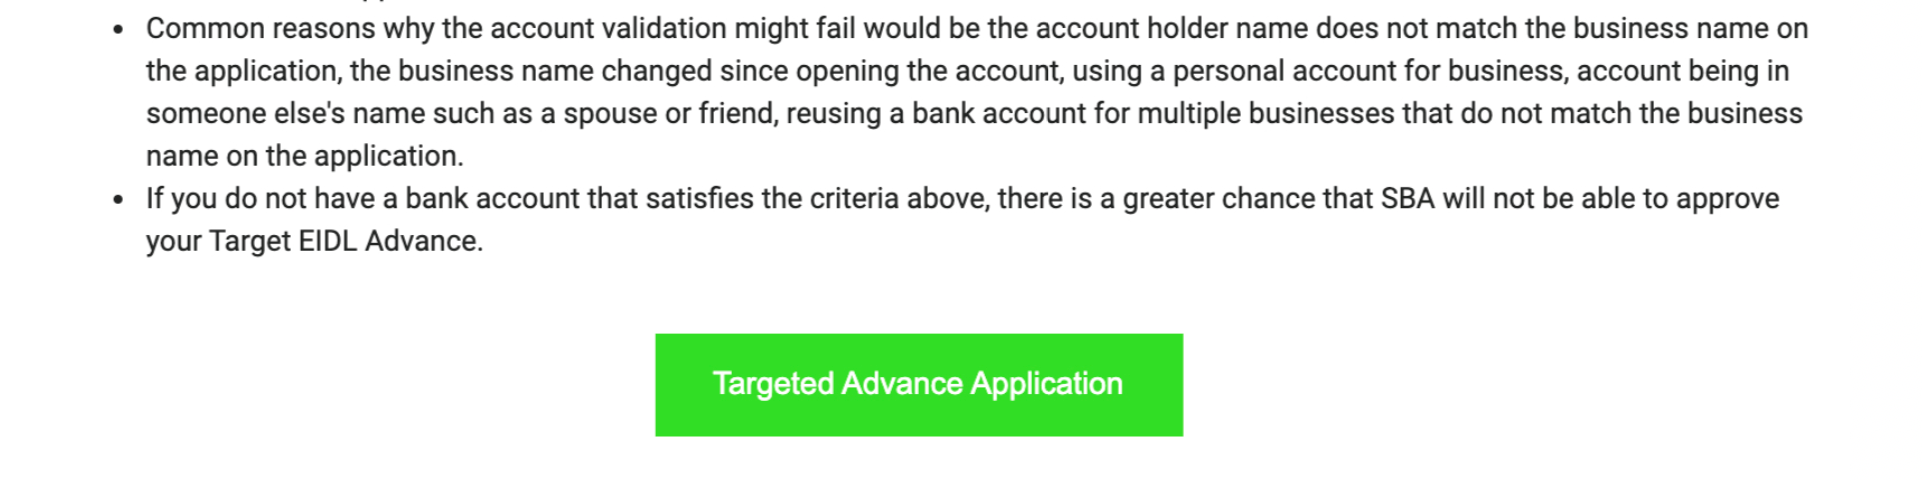 https://static.helloskip.com/blog/2021/02/SBA-Targeted-EIDL-Advance-Email-Application-Button.png